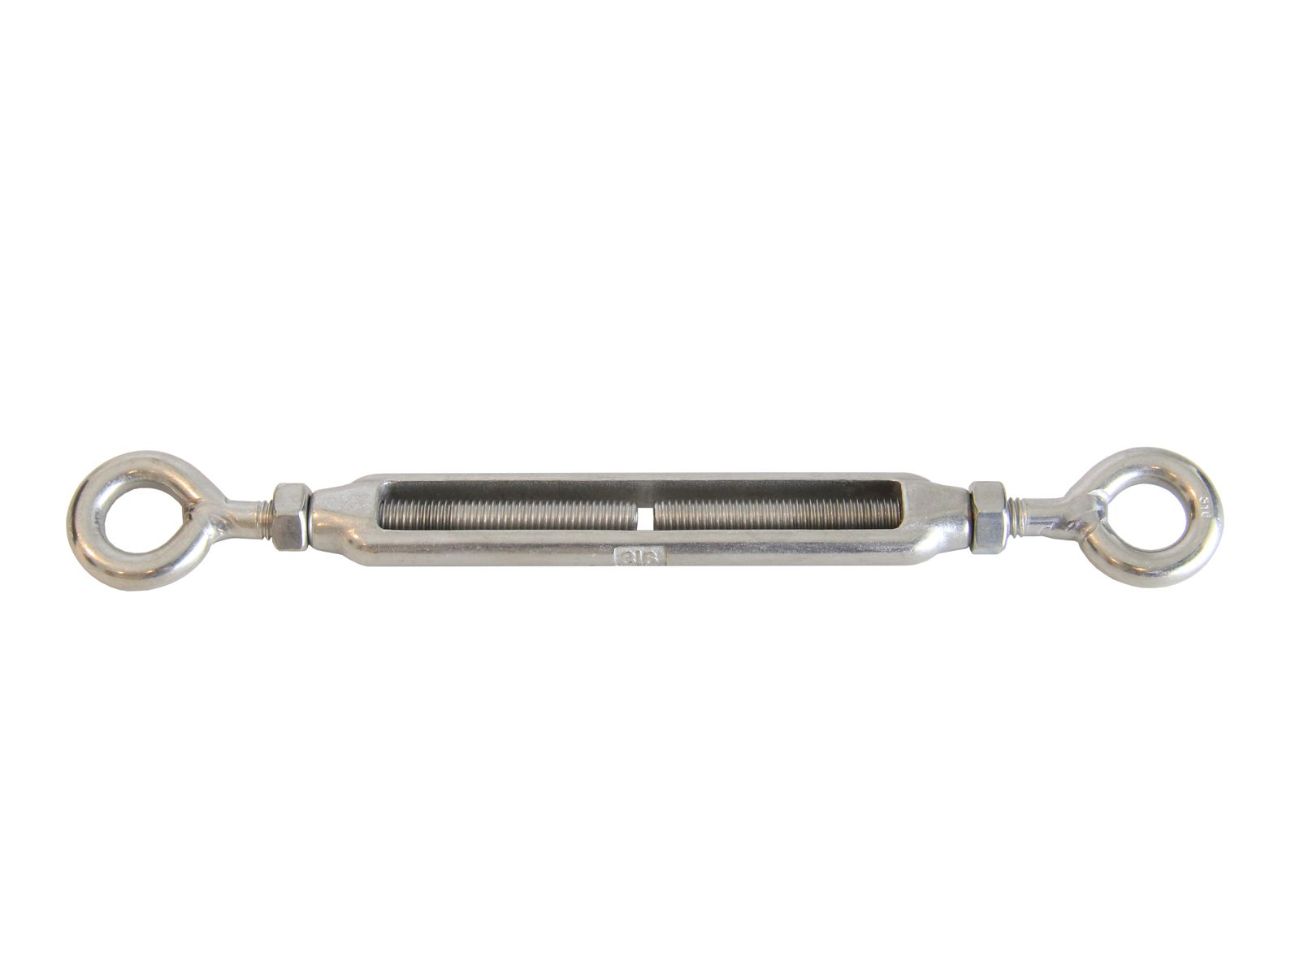 8mm stainless steel turnbuckle for shade sails